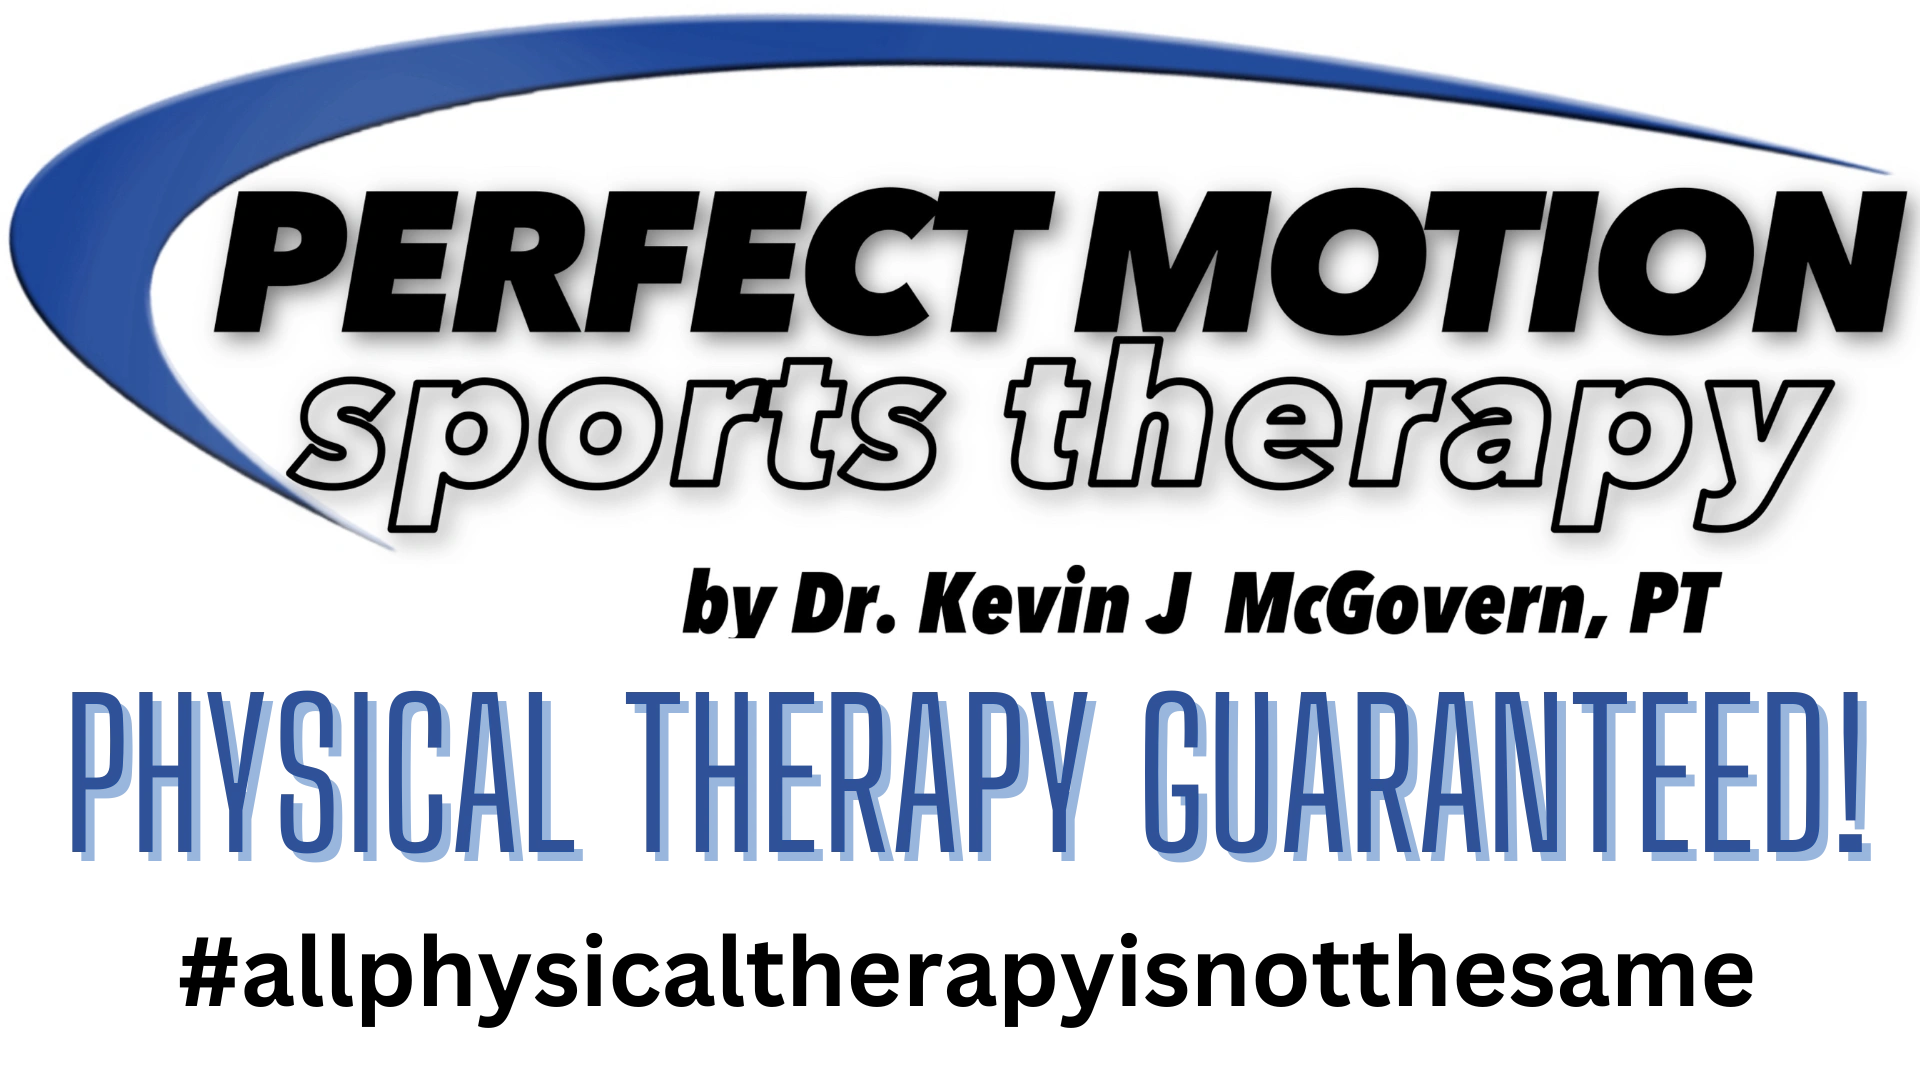 (c) Perfectmotionsportstherapy.com